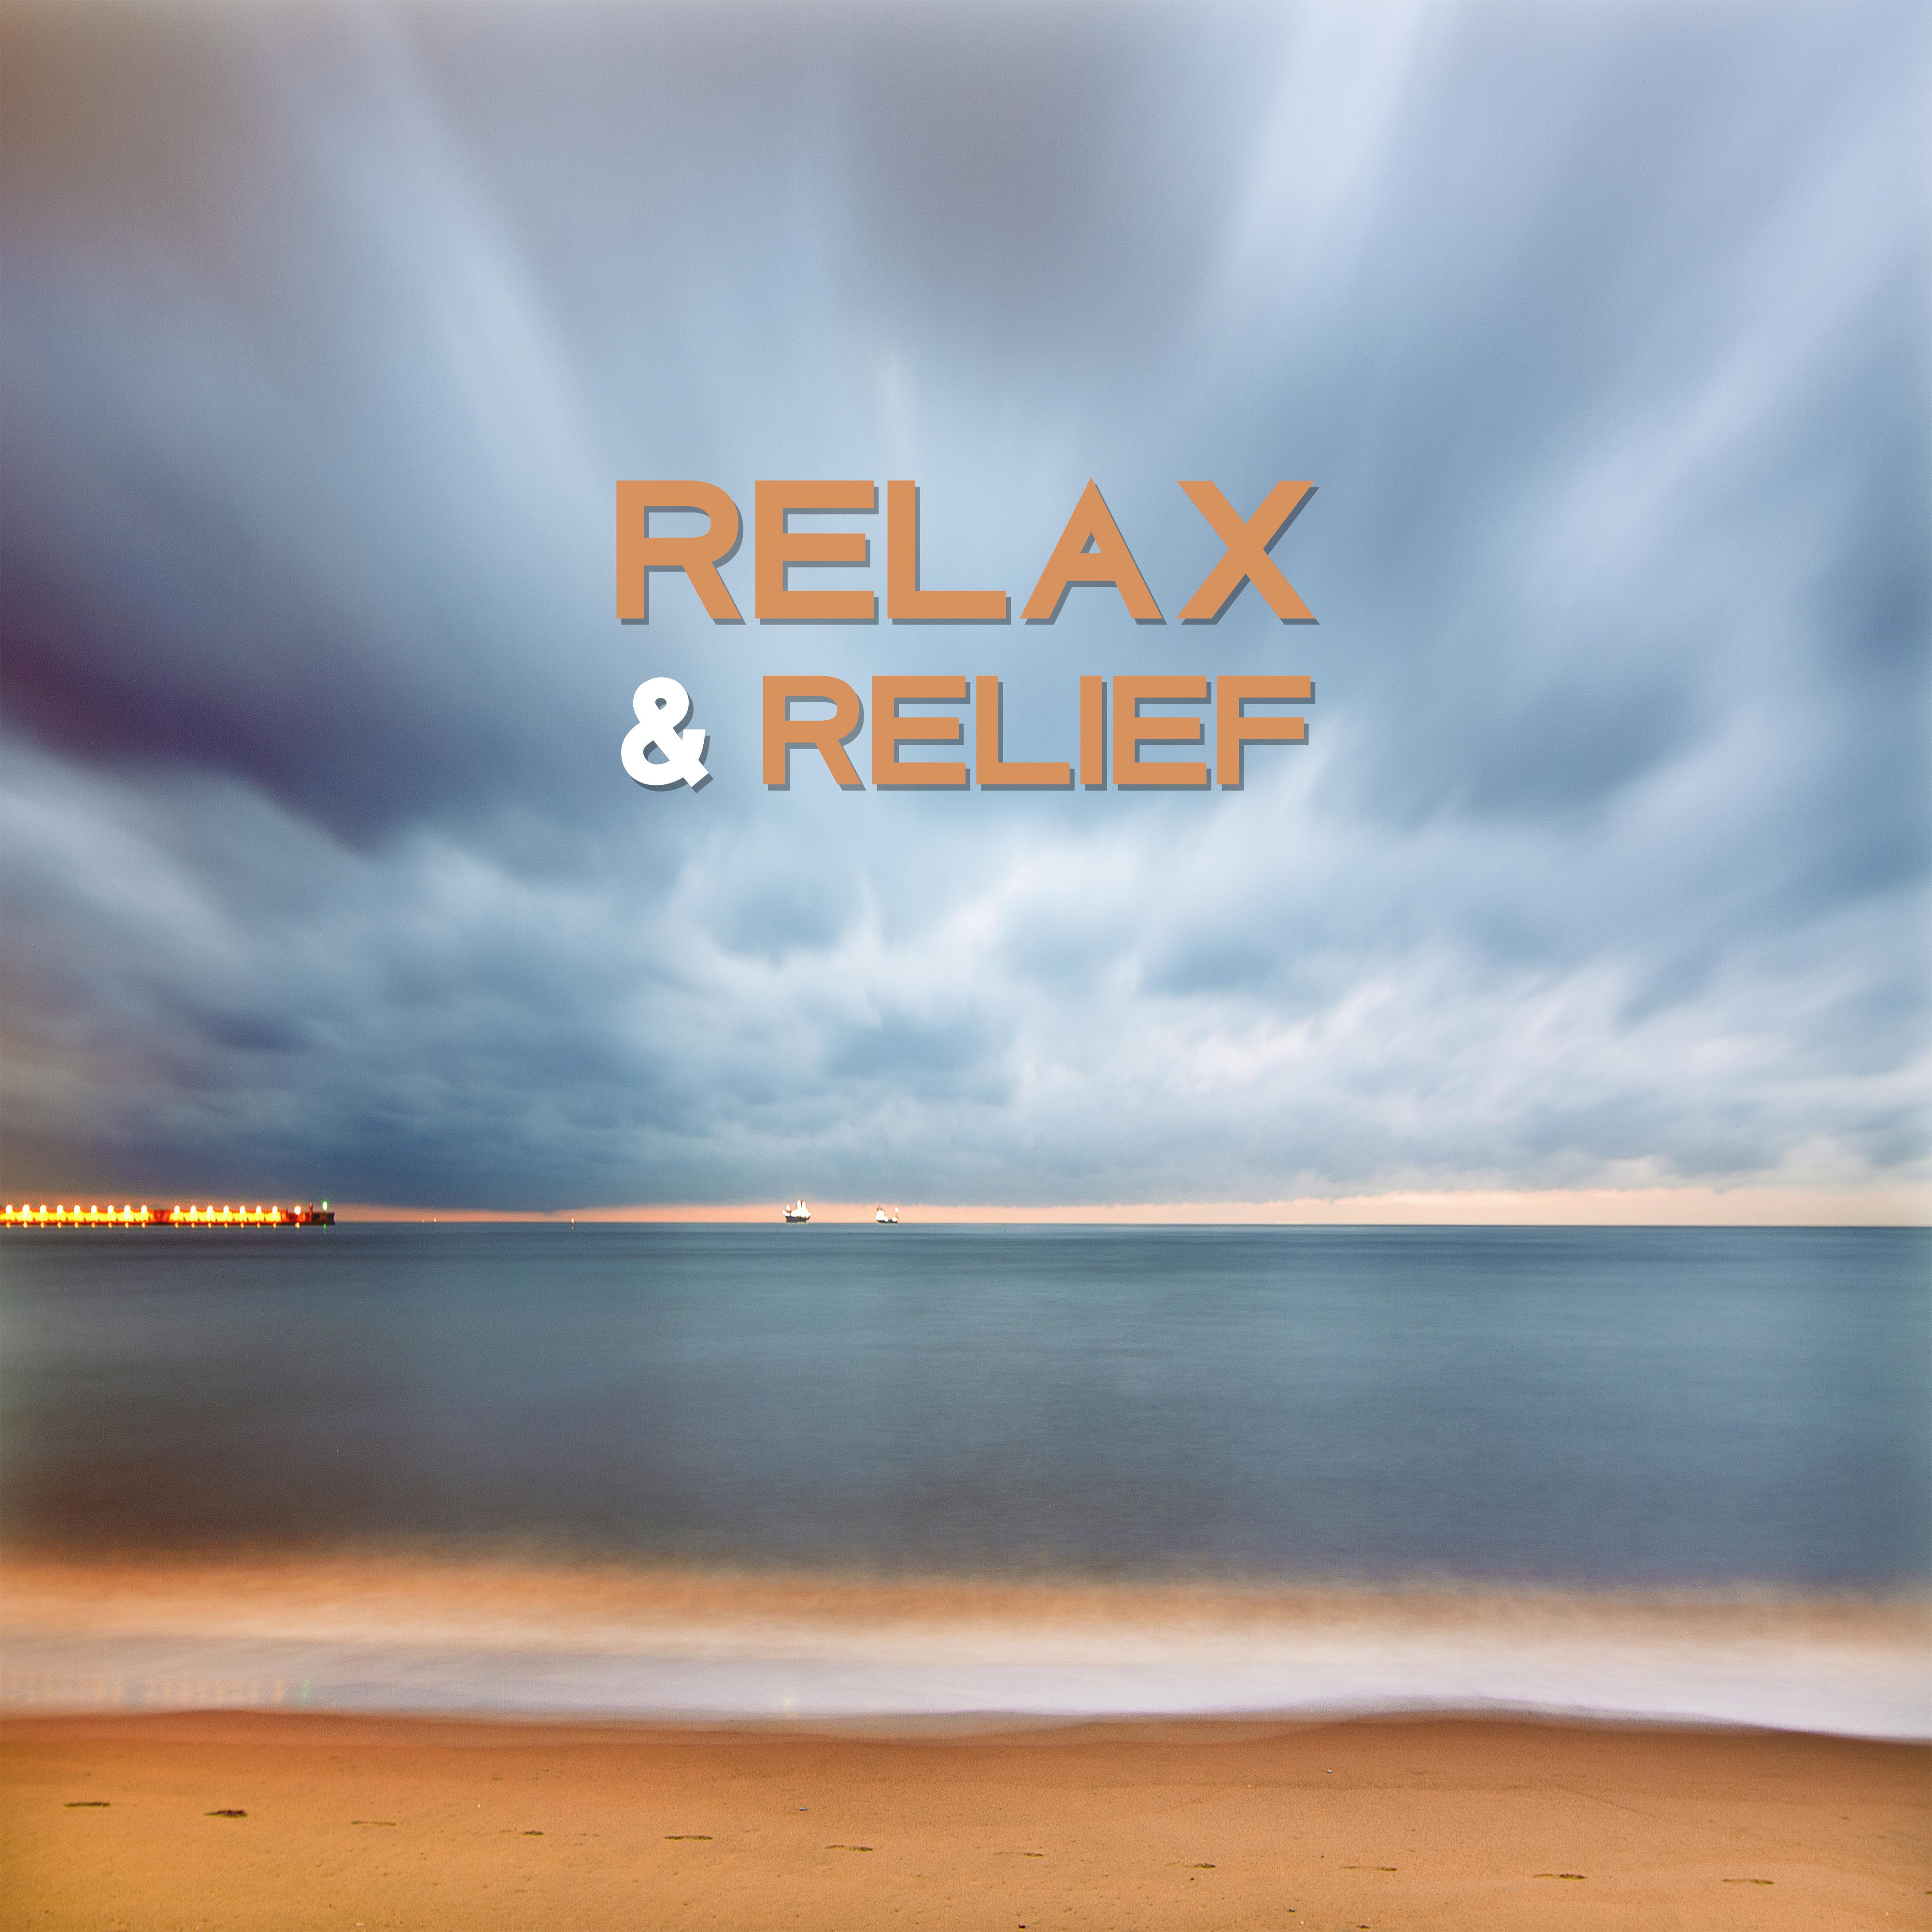 Relax & Relief – Soft Nature Sounds for Relaxation, Music to Calm Down, Instrumental Songs to Rest, Pure Waves, Singing Birds, Zen